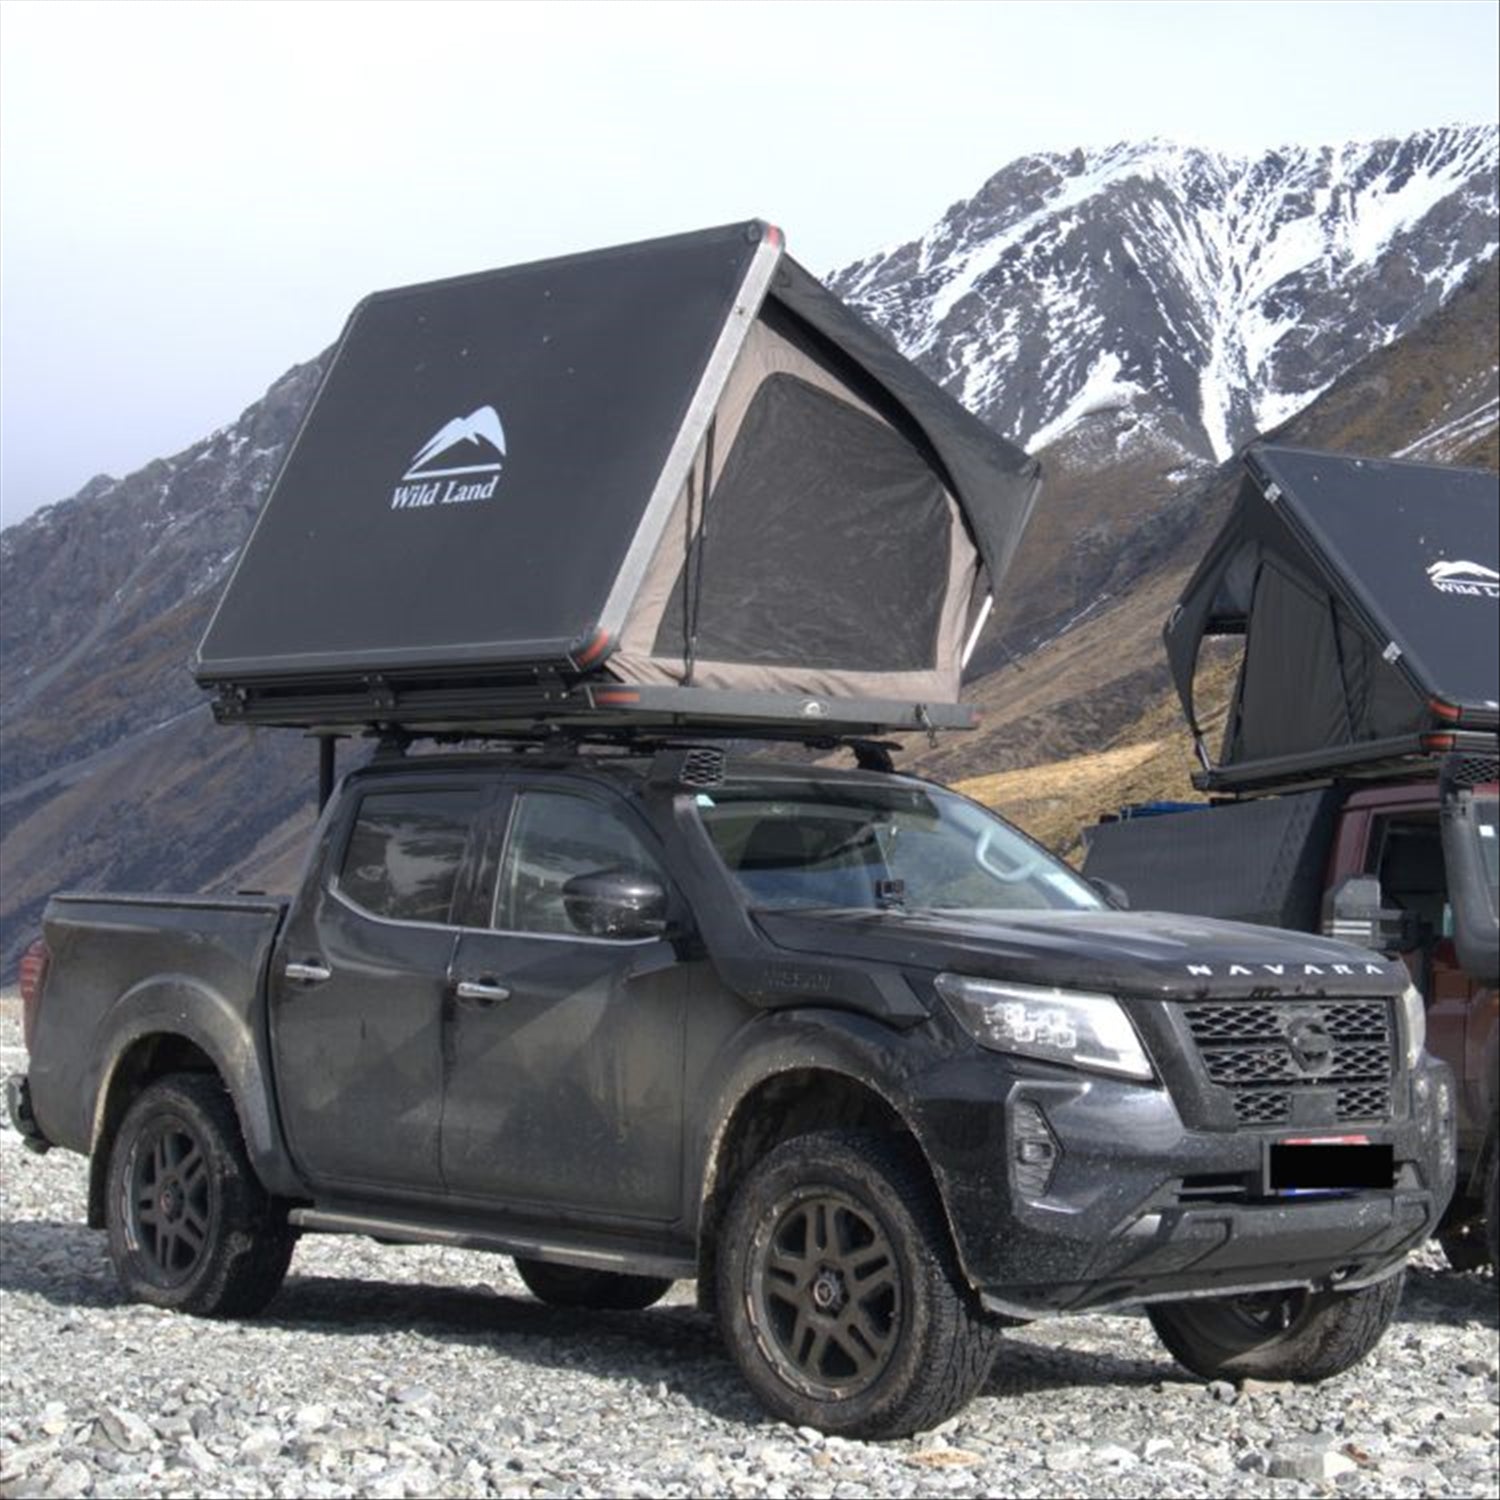 Wild Land Wild Land DC2 Aluminium Hard Shell Roof Top Tent includes free cargo racks - 120cm or 140cm wide